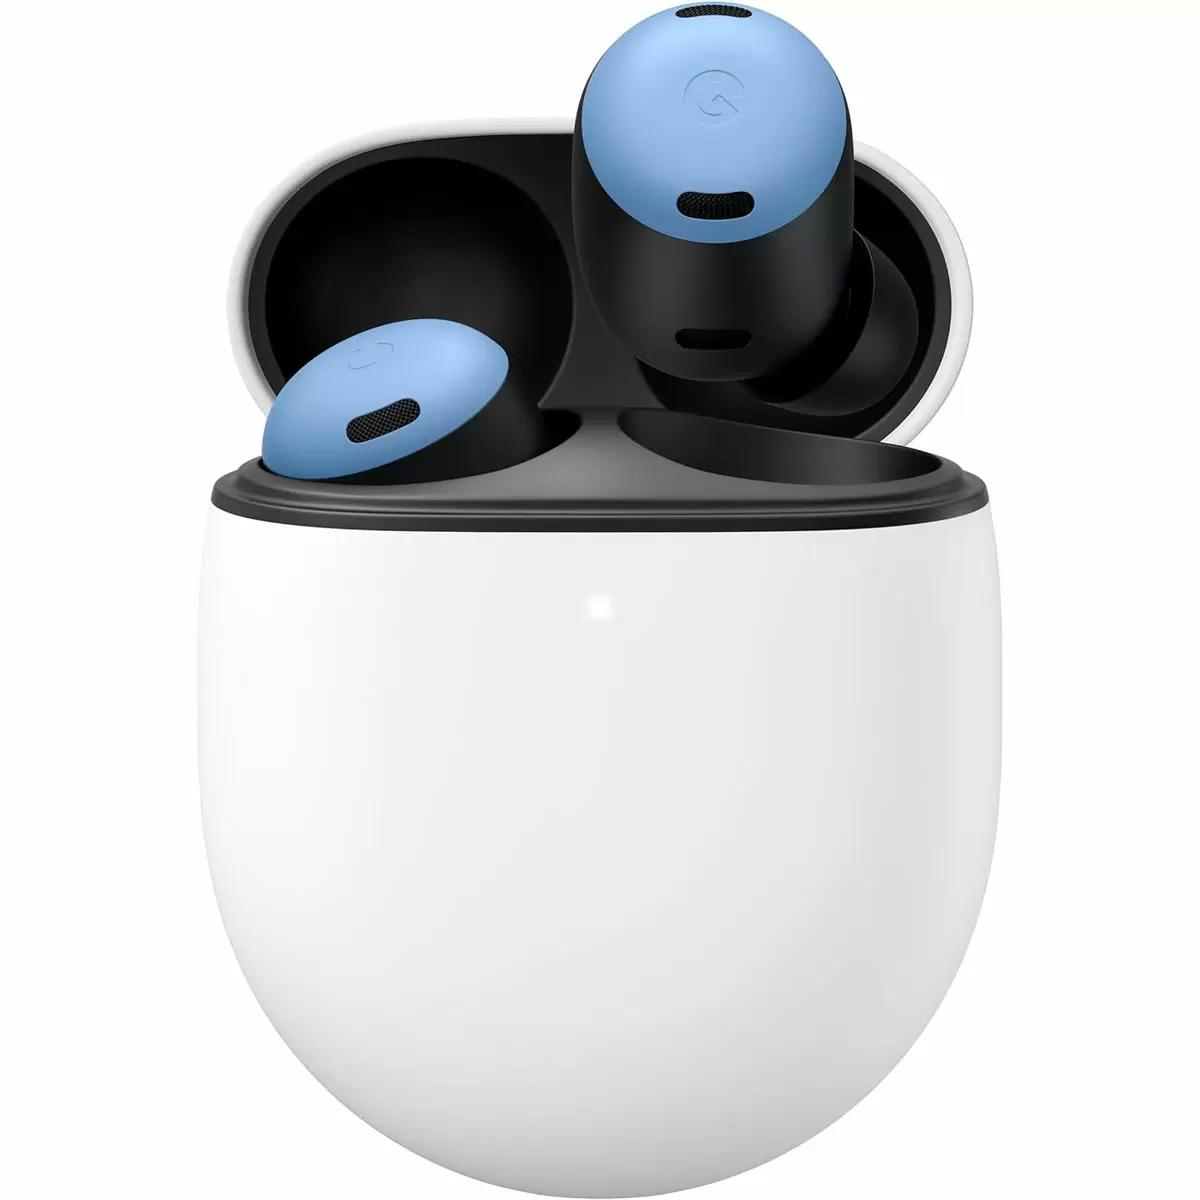 Google Pixel Buds Pro True Wireless Noise Cancelling Earbuds for $149.99 Shipped